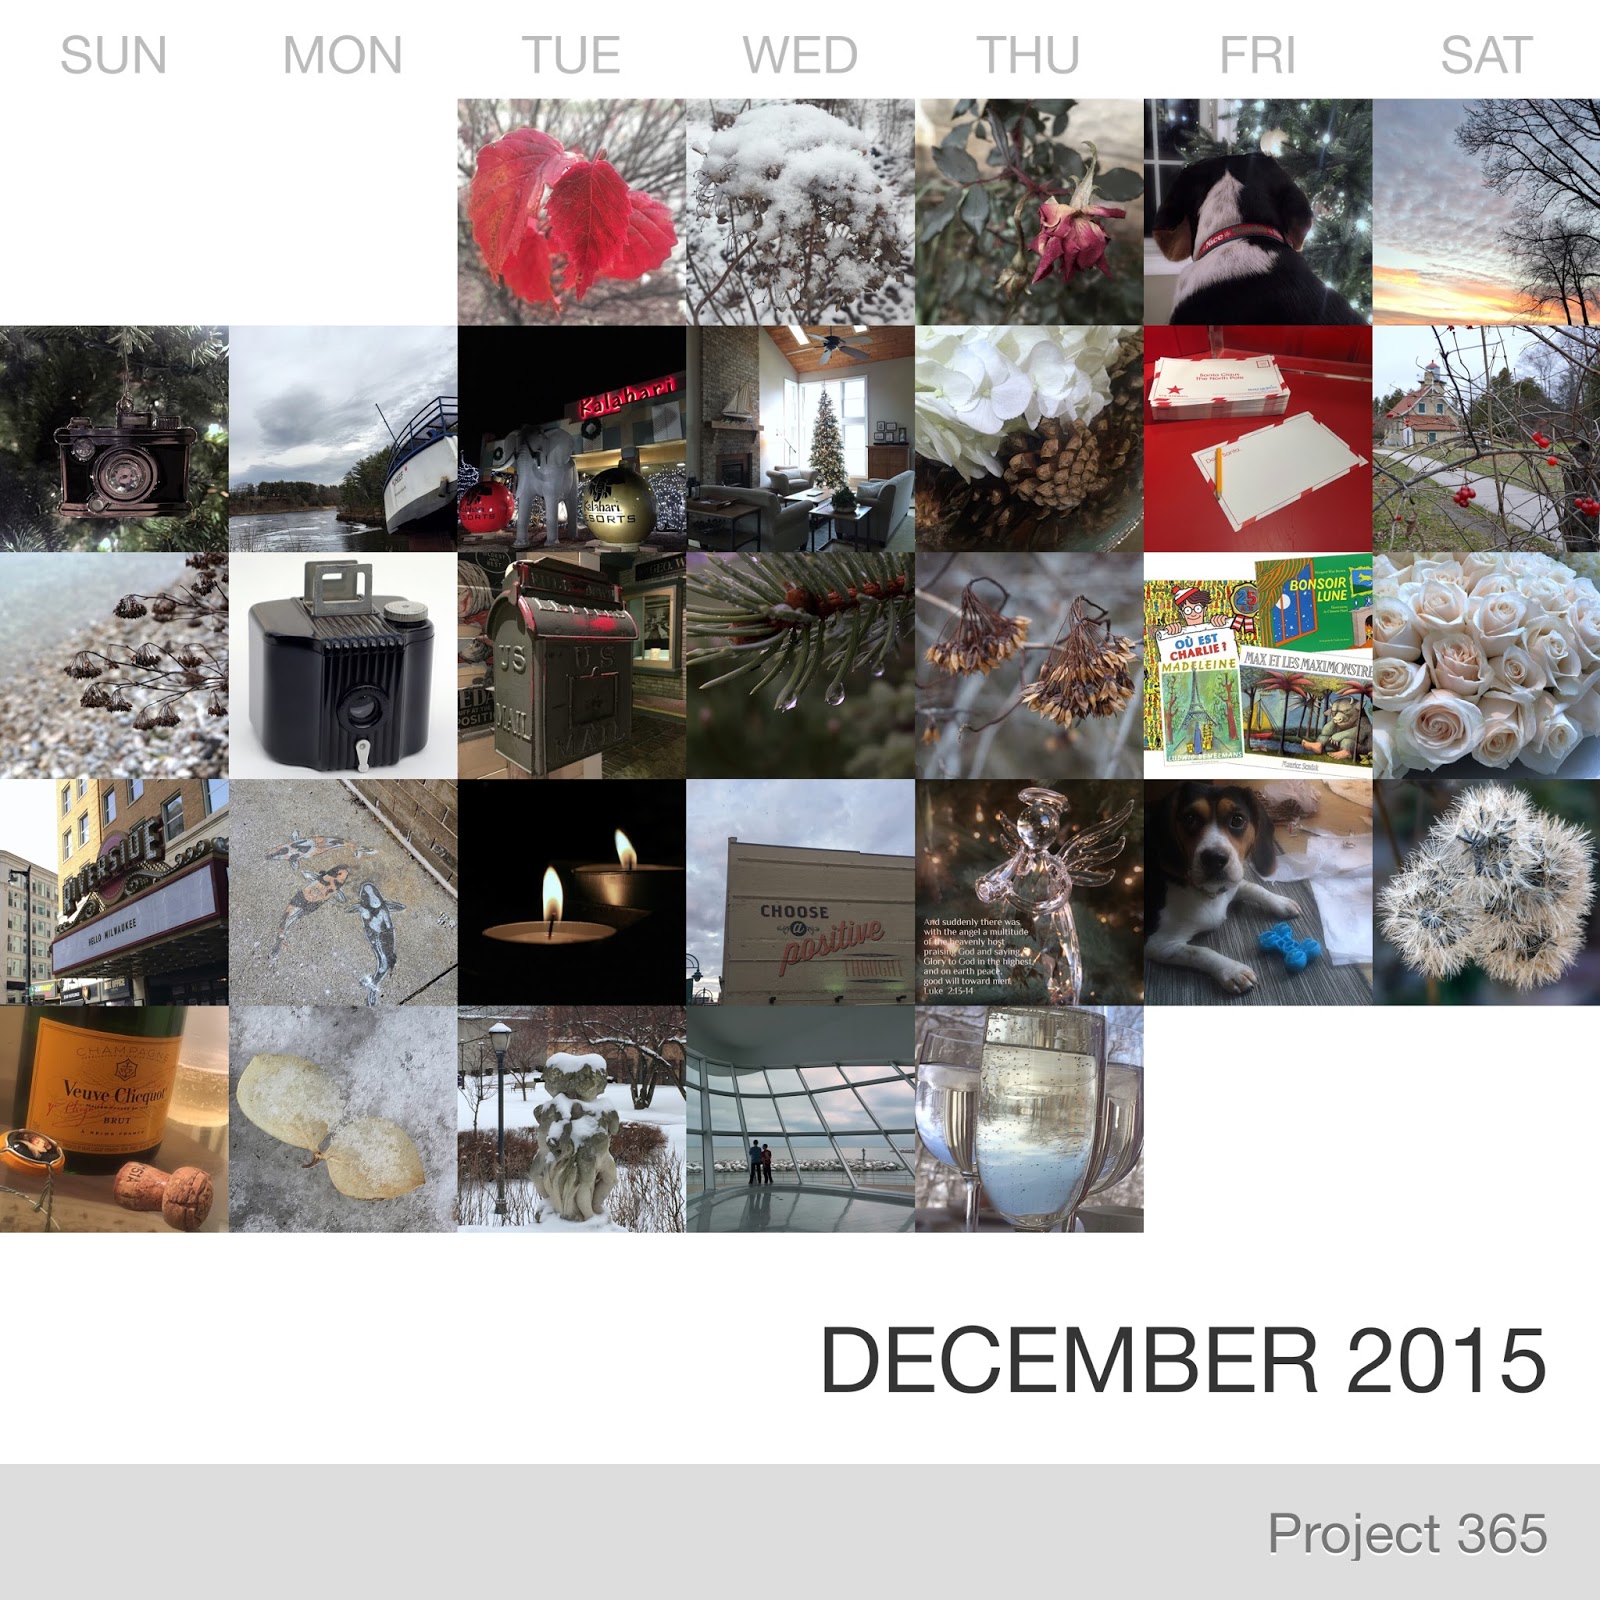 Project 365 _December-2015_Collage.jpg